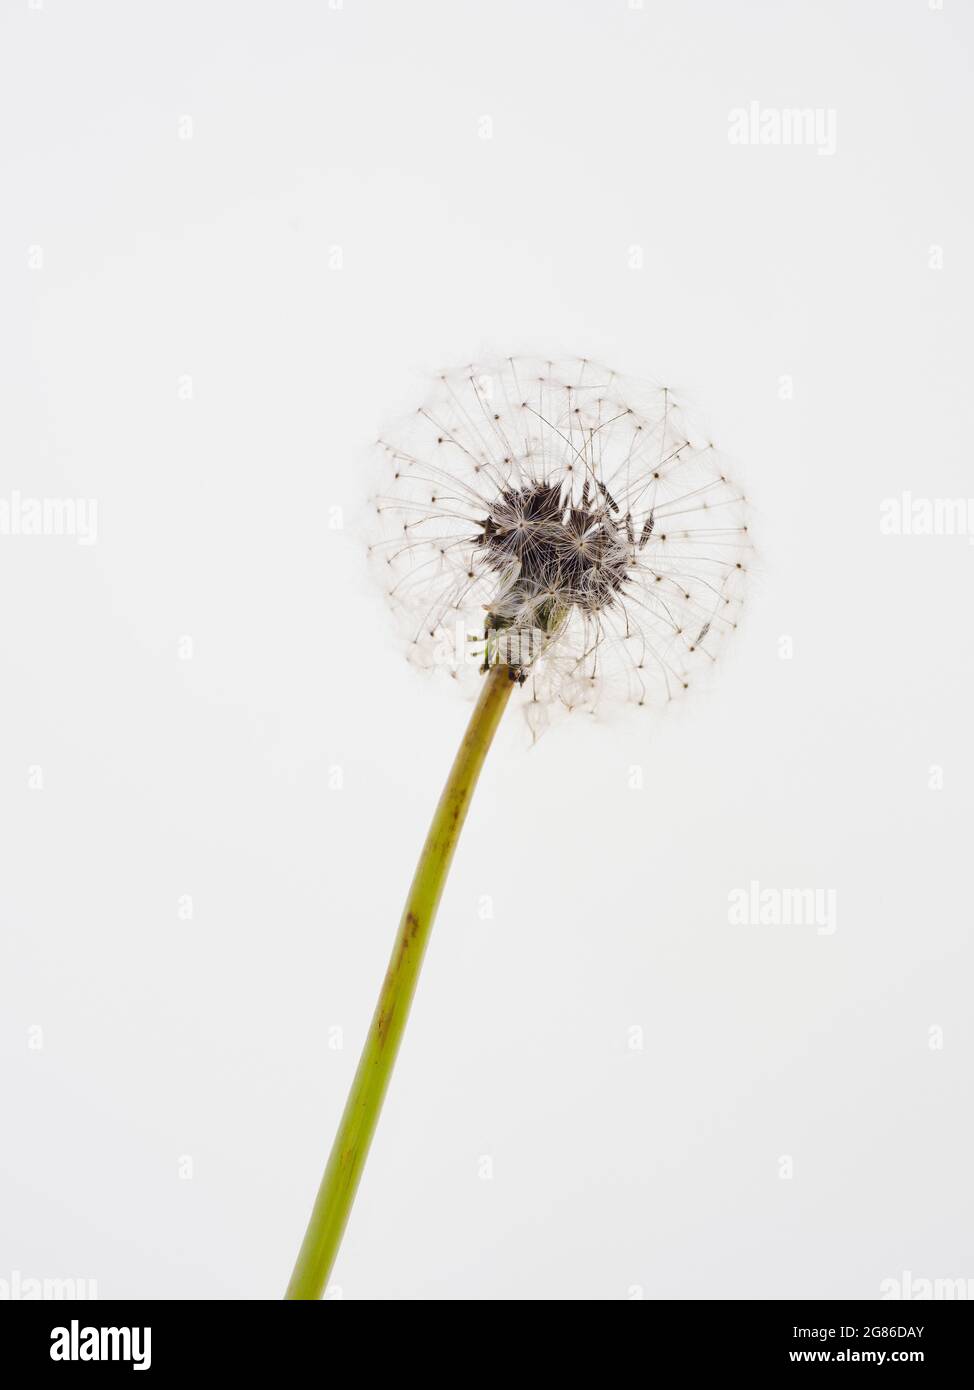 A single dandelion seed had seen in close-up against an isolated white background Stock Photo